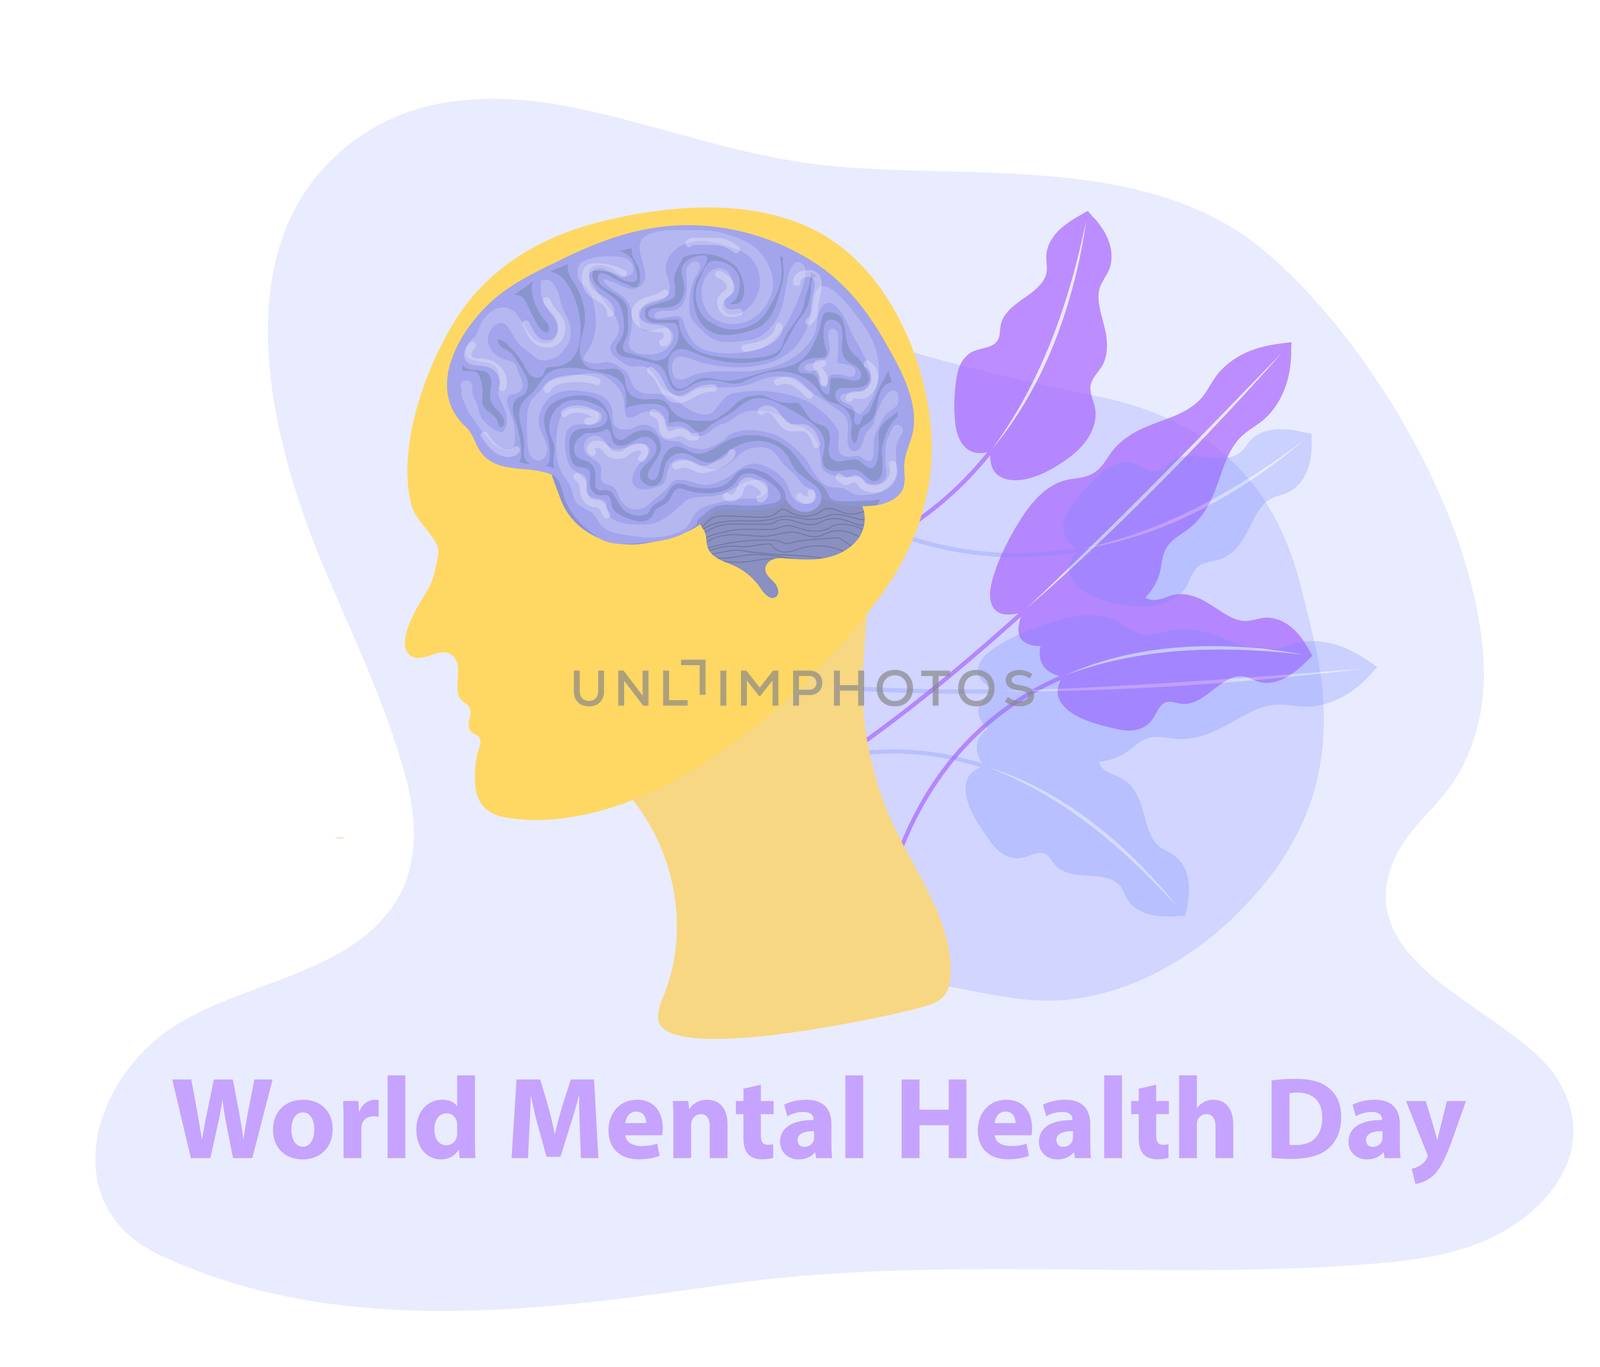 World Mental Health Day. Silhouette of a man's head with brain. Isolated on a white background. illustration.